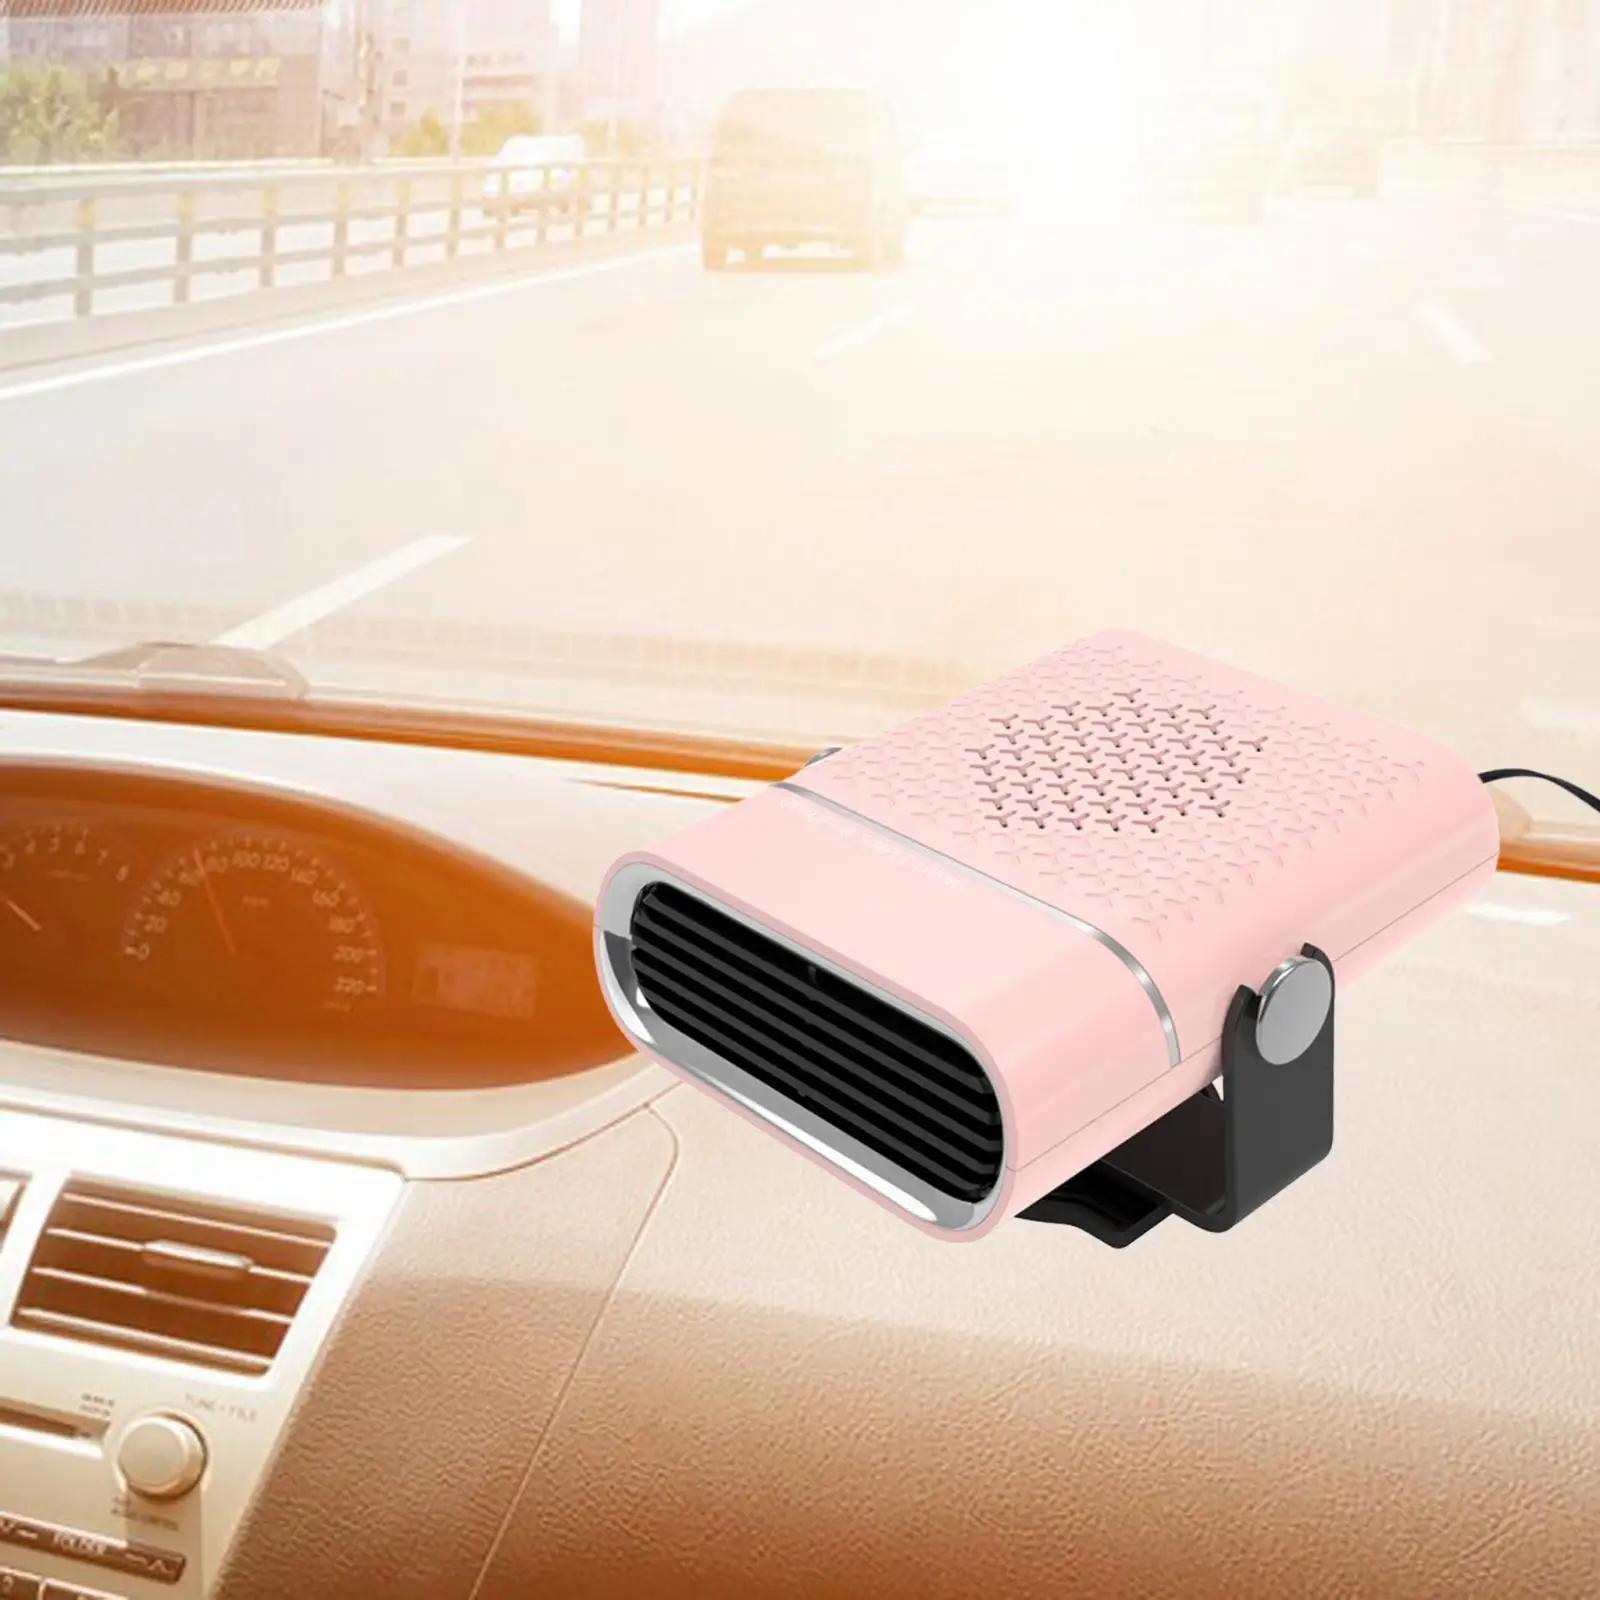 Car Heater 24V Heating and Cooling Windshield Defroster Plug into Cigarette Lighter Auto Vehicle Heater Car Heater and Defroster